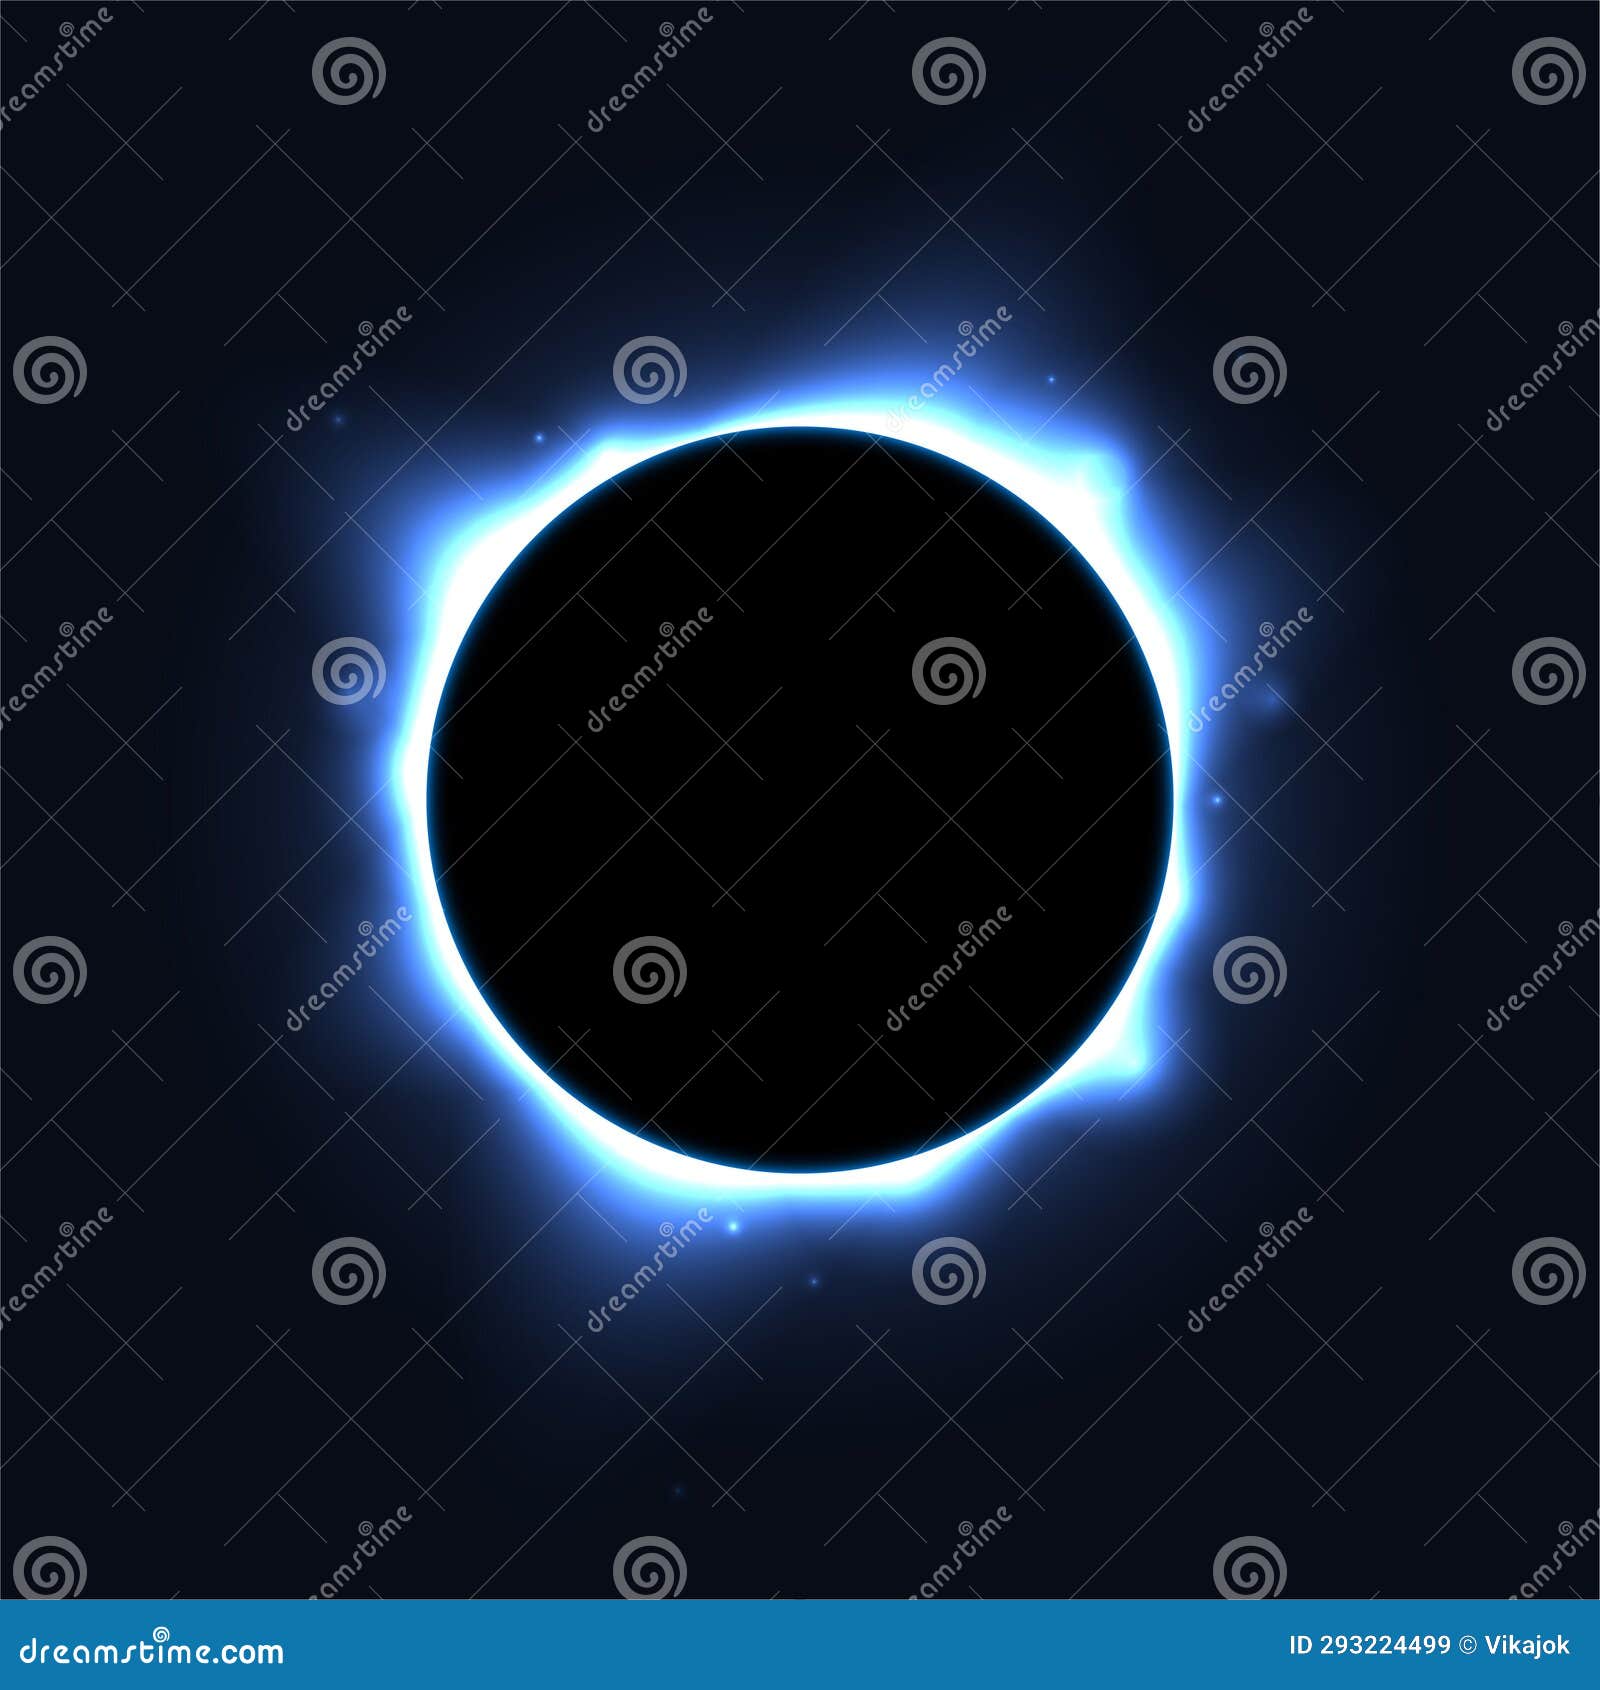 sun full eclipse concept. light blue moon glow background. solar or planet total eclipse in dark space. hot star surface